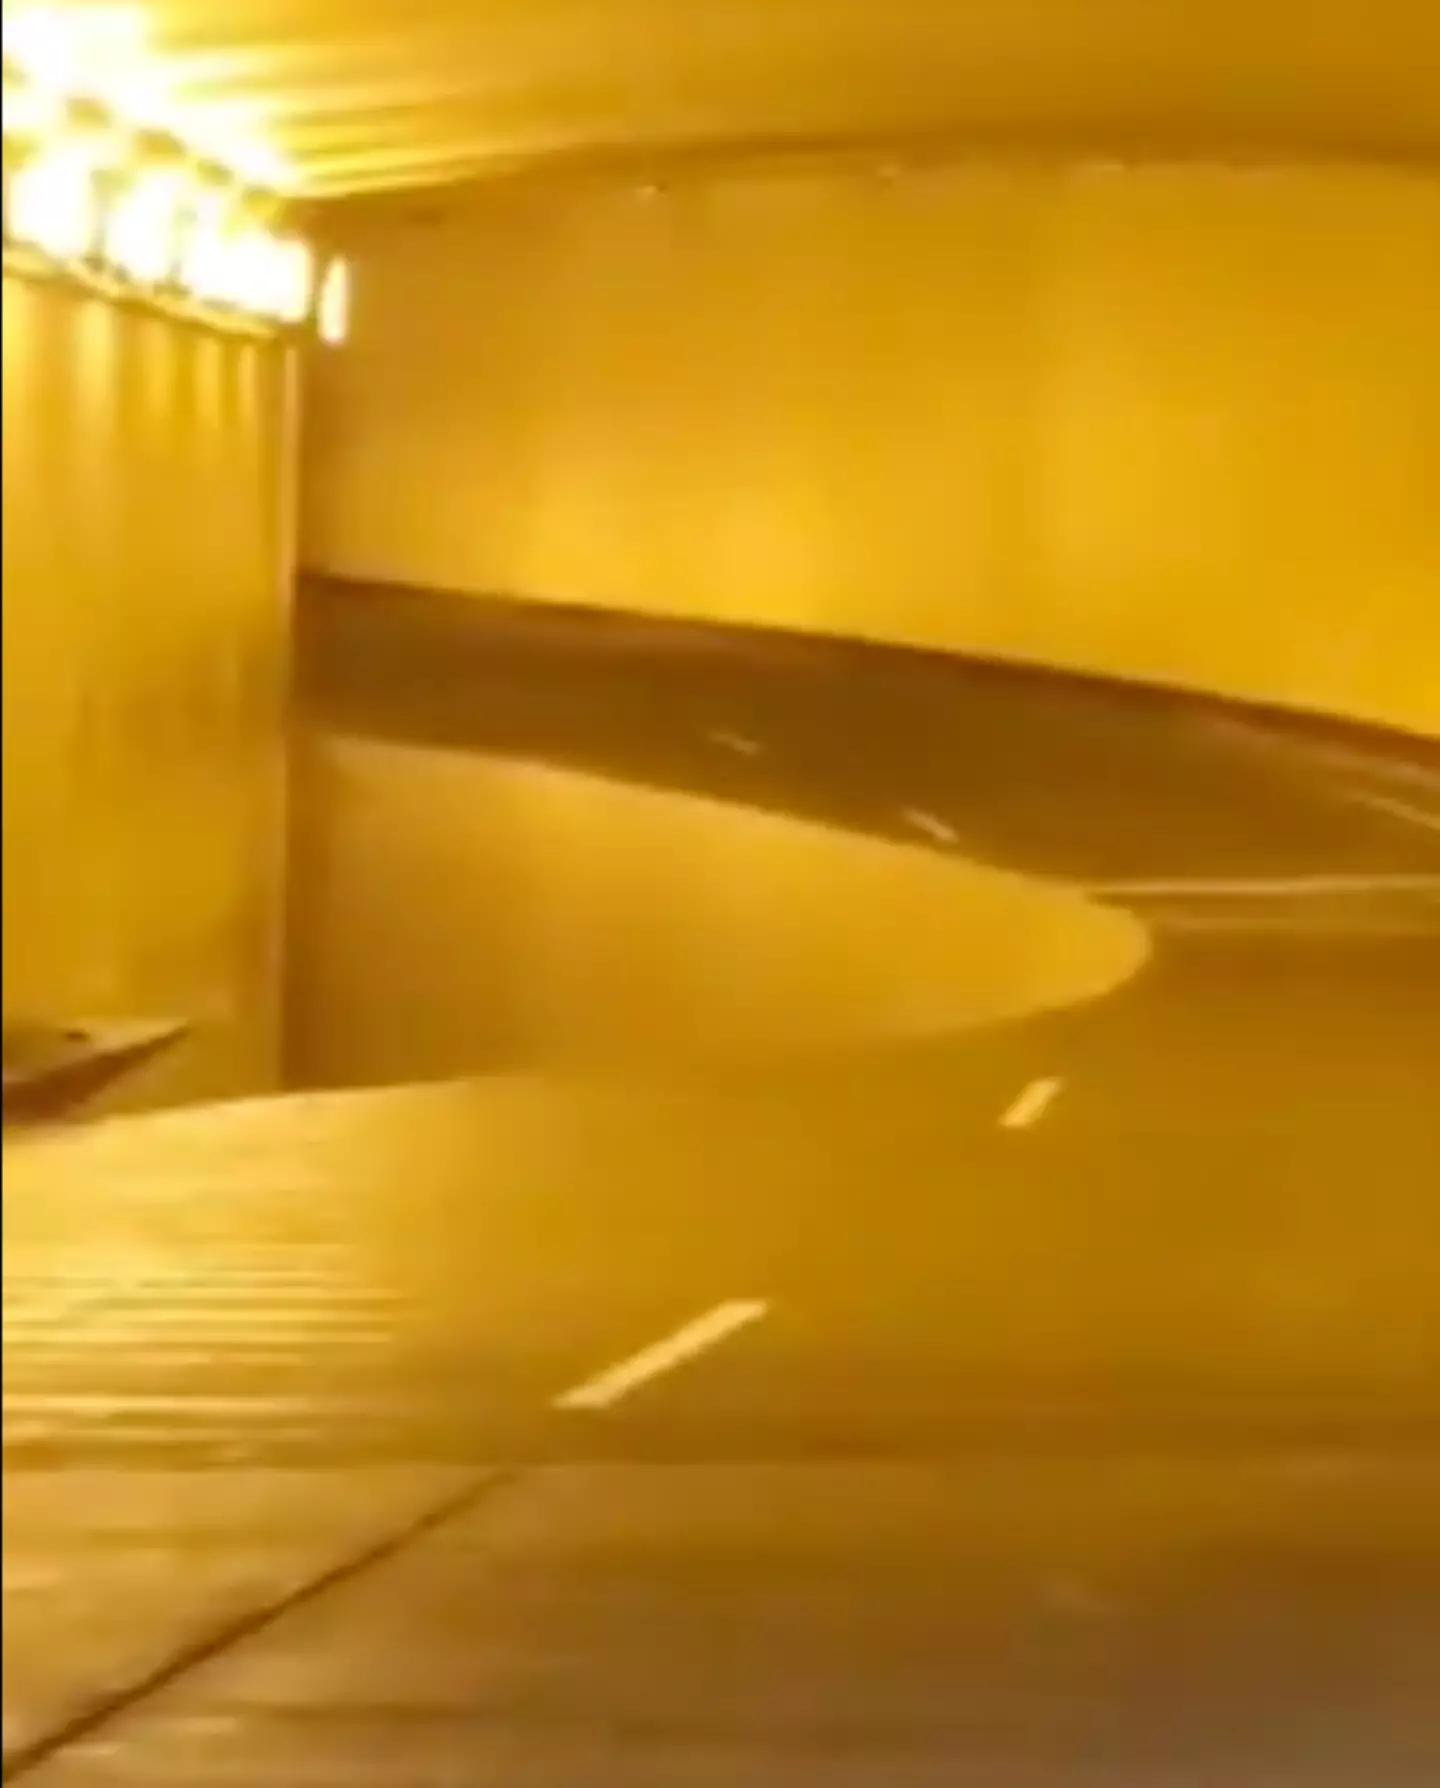 Hitting the brakes in front of the mind-bending optical illusion, the driver can be heard saying: “F**k bro.